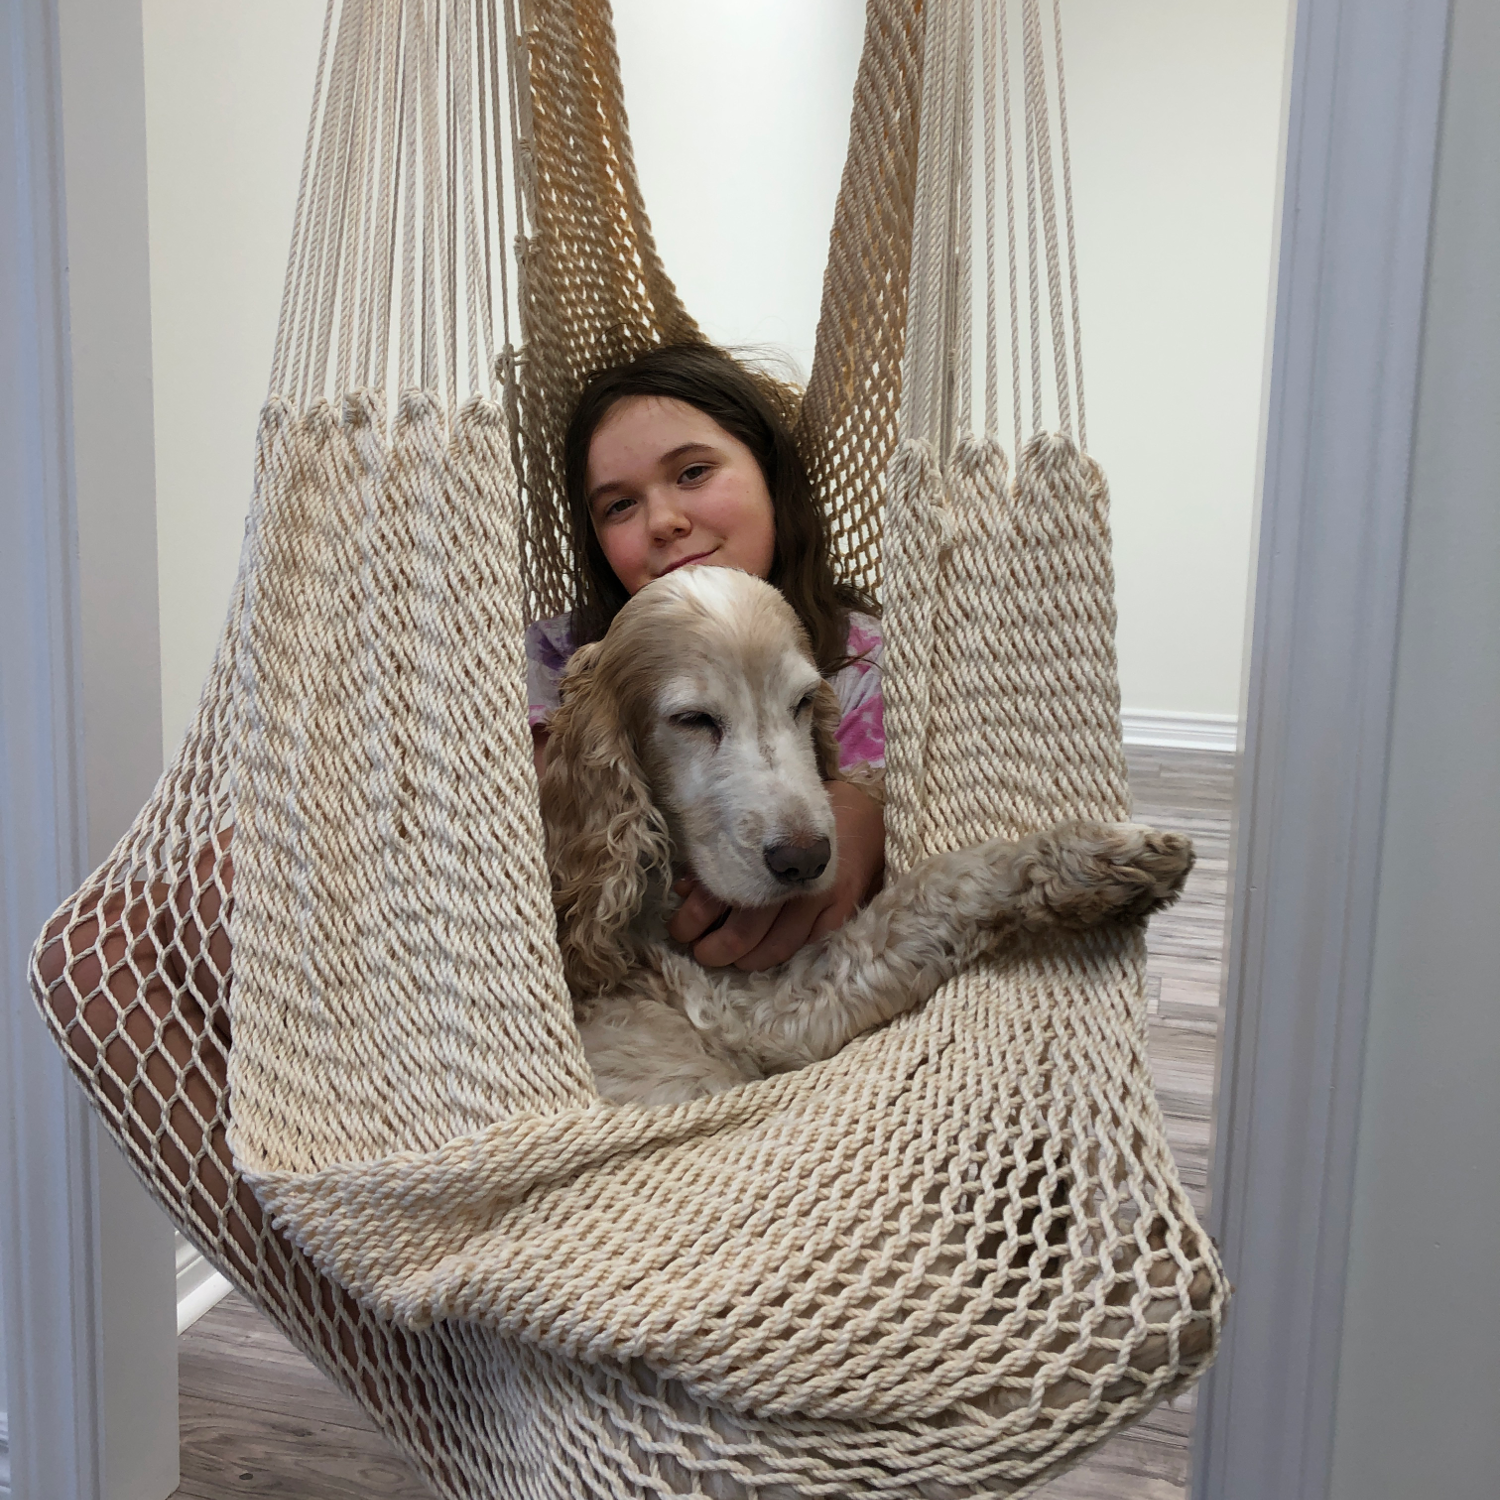 A girl and her puppy are sitting in a hammock swing installed in the doorway.